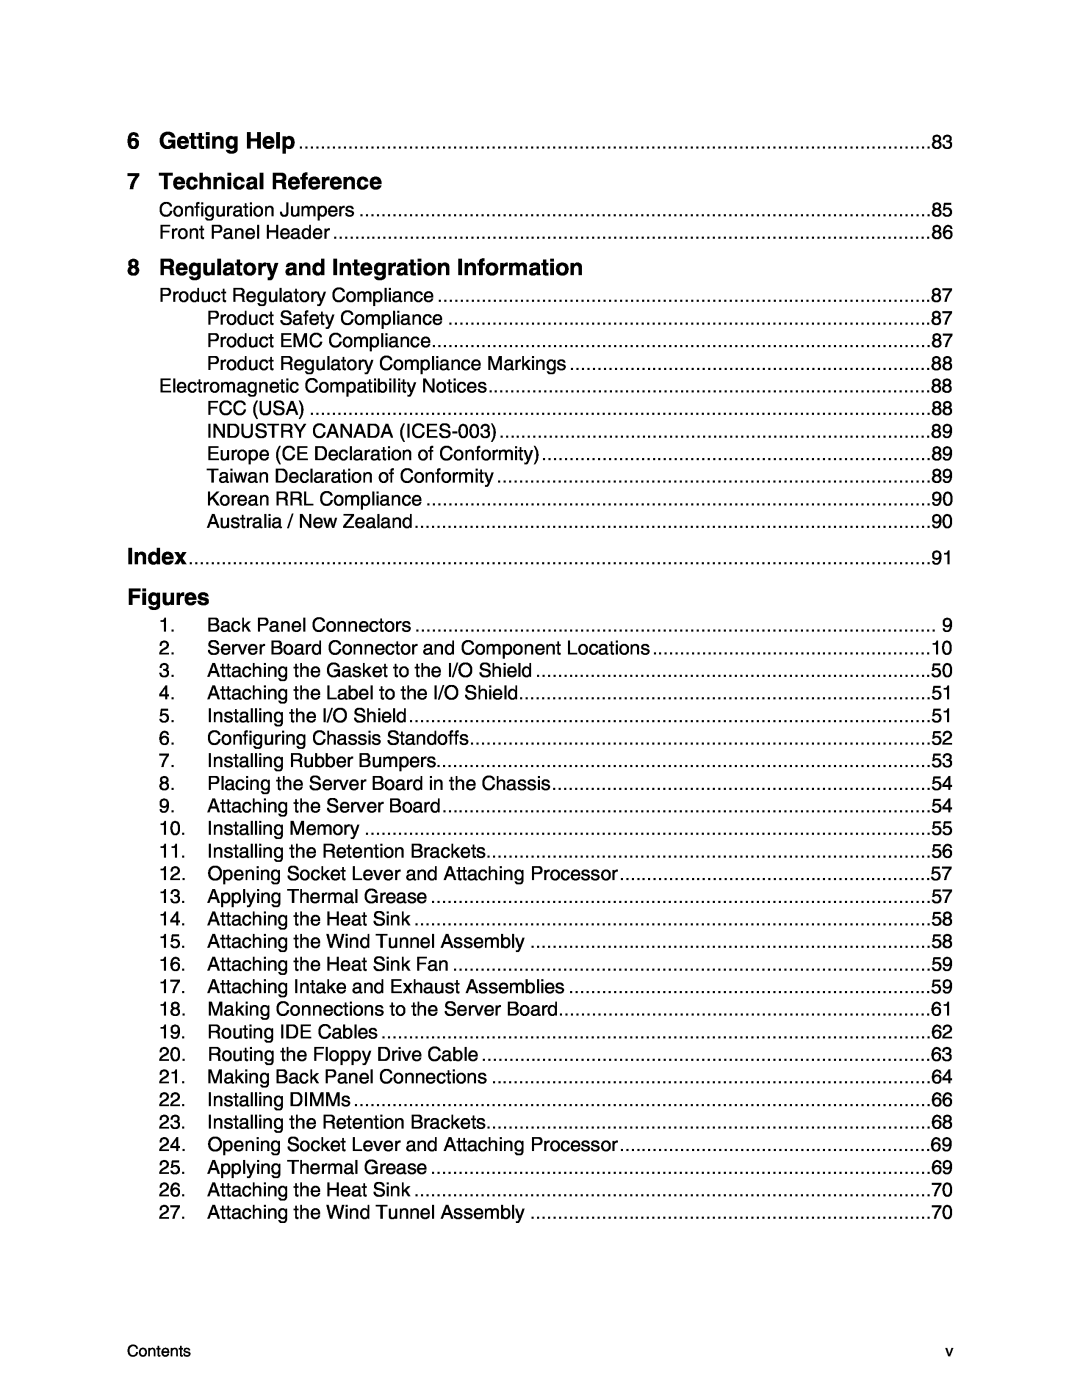 Intel SE7500CW2 manual Technical Reference, Regulatory and Integration Information, Index, Figures 